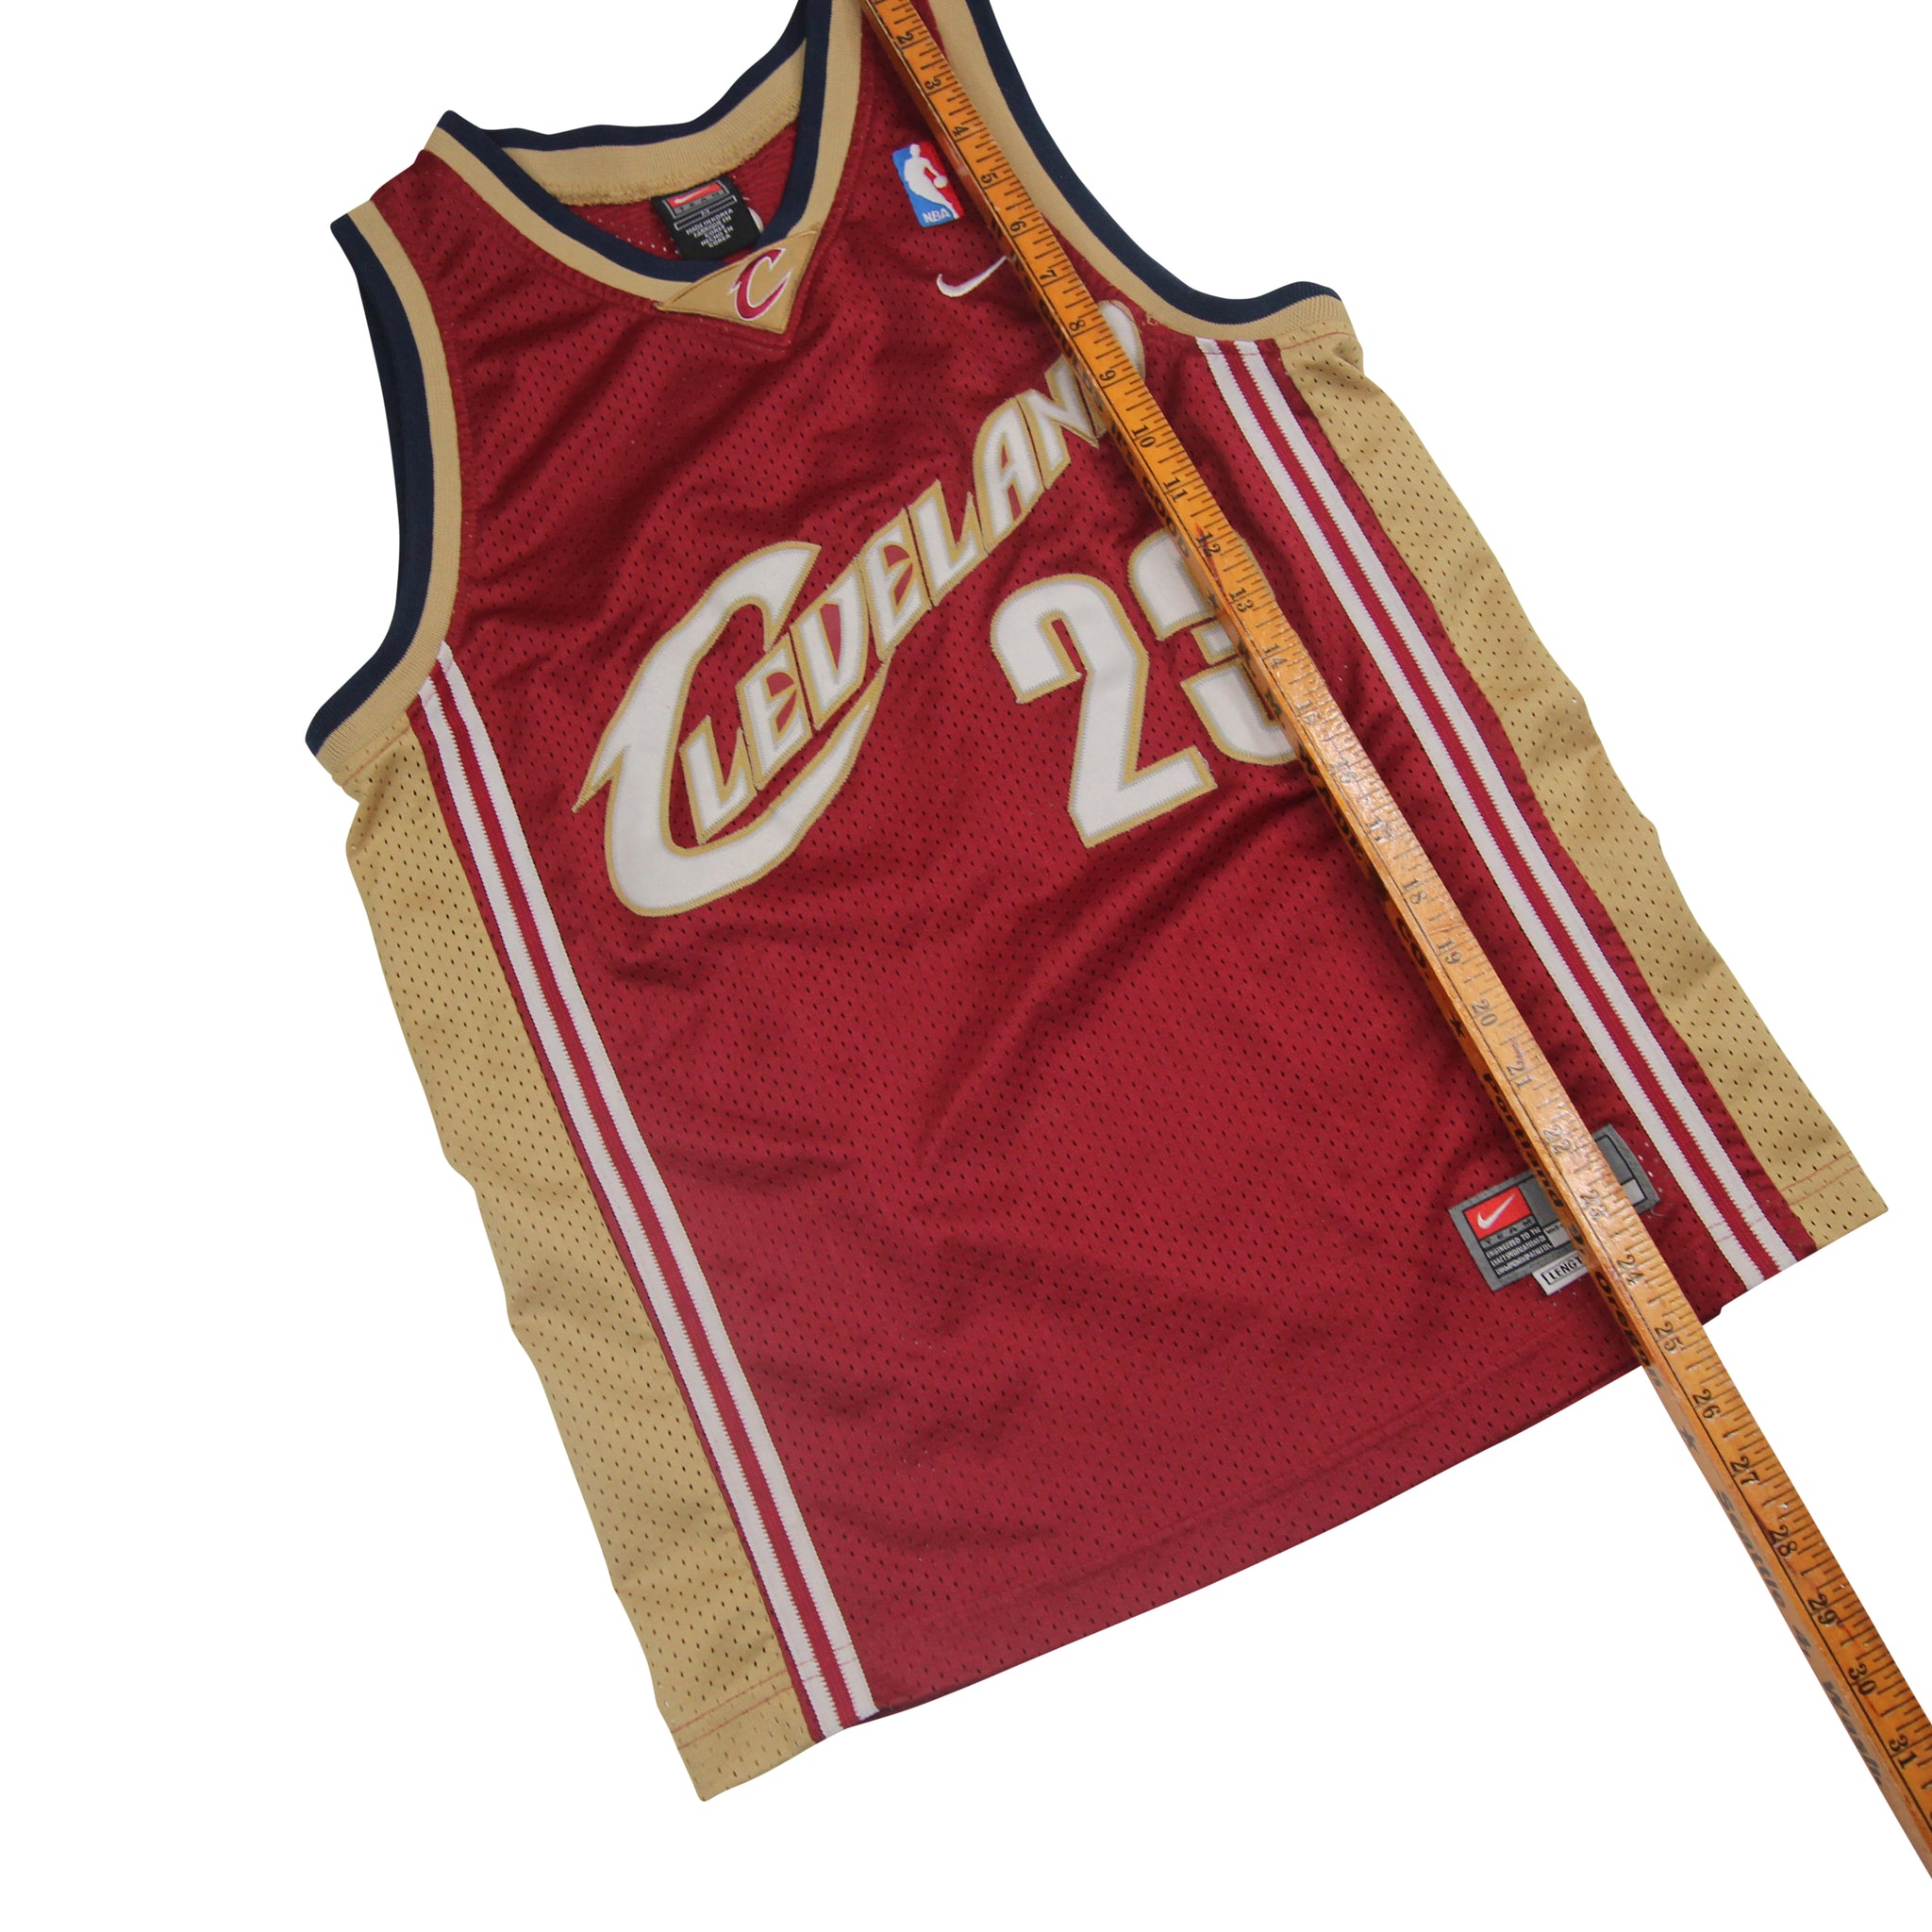 LeBron James Jersey Miami Heat and Cleveland Cavaliers Youth Medium